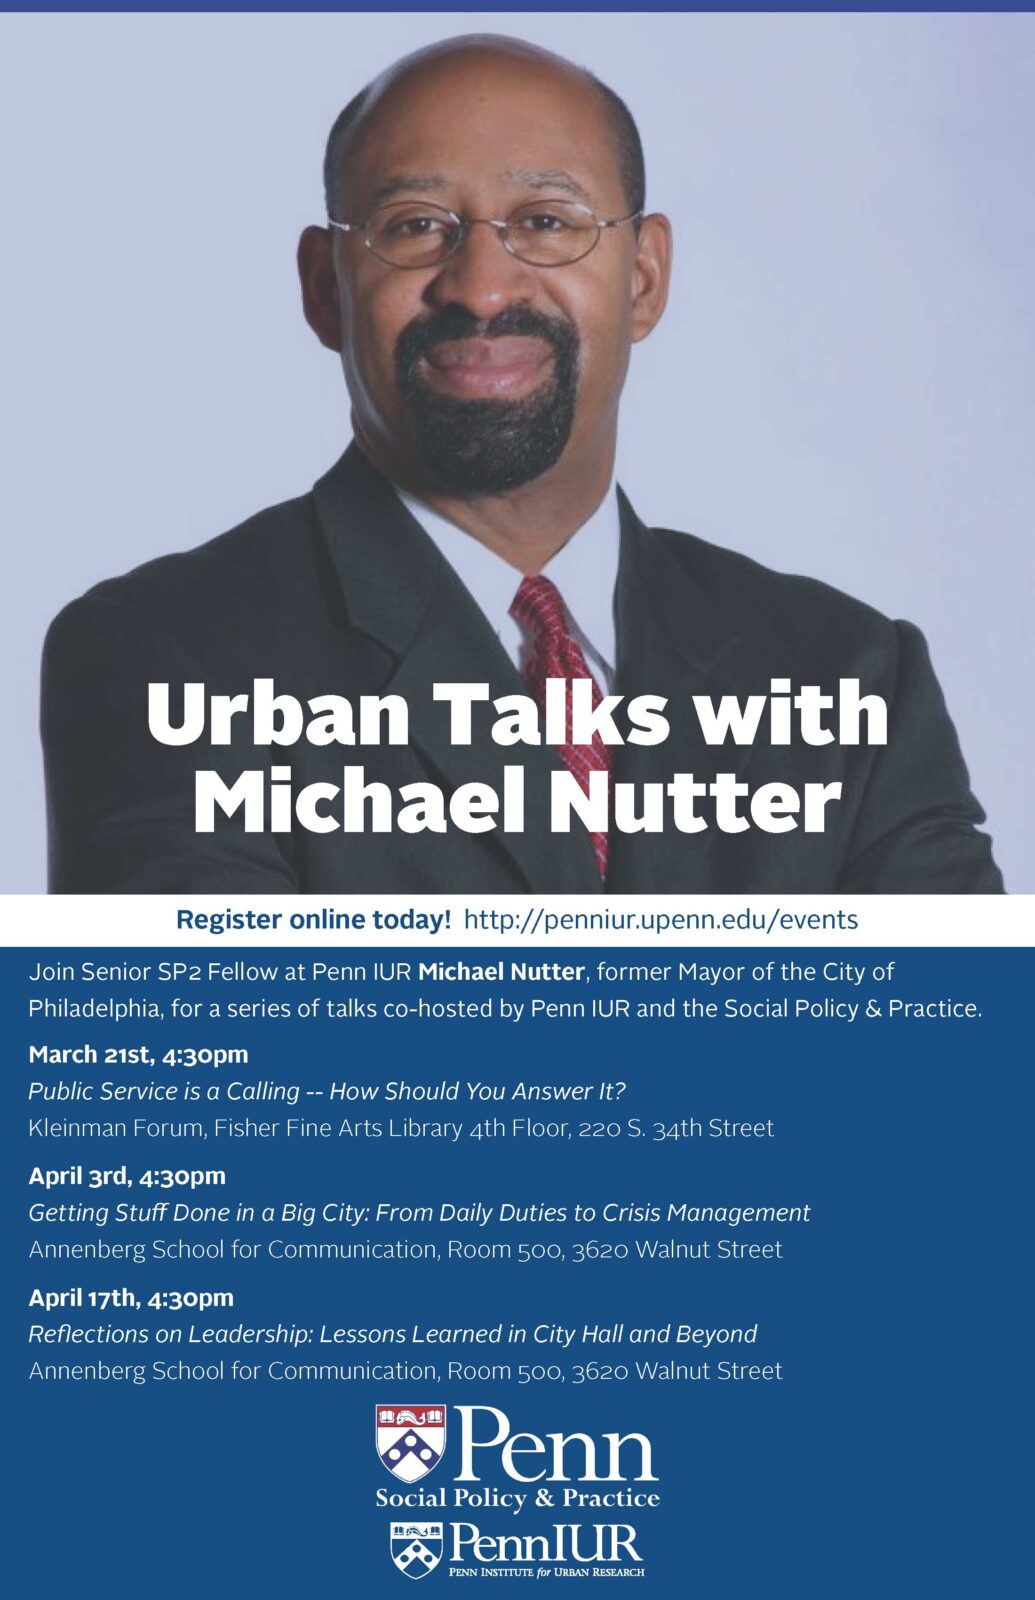 Flyer for Urban Talks with Michael Nutter